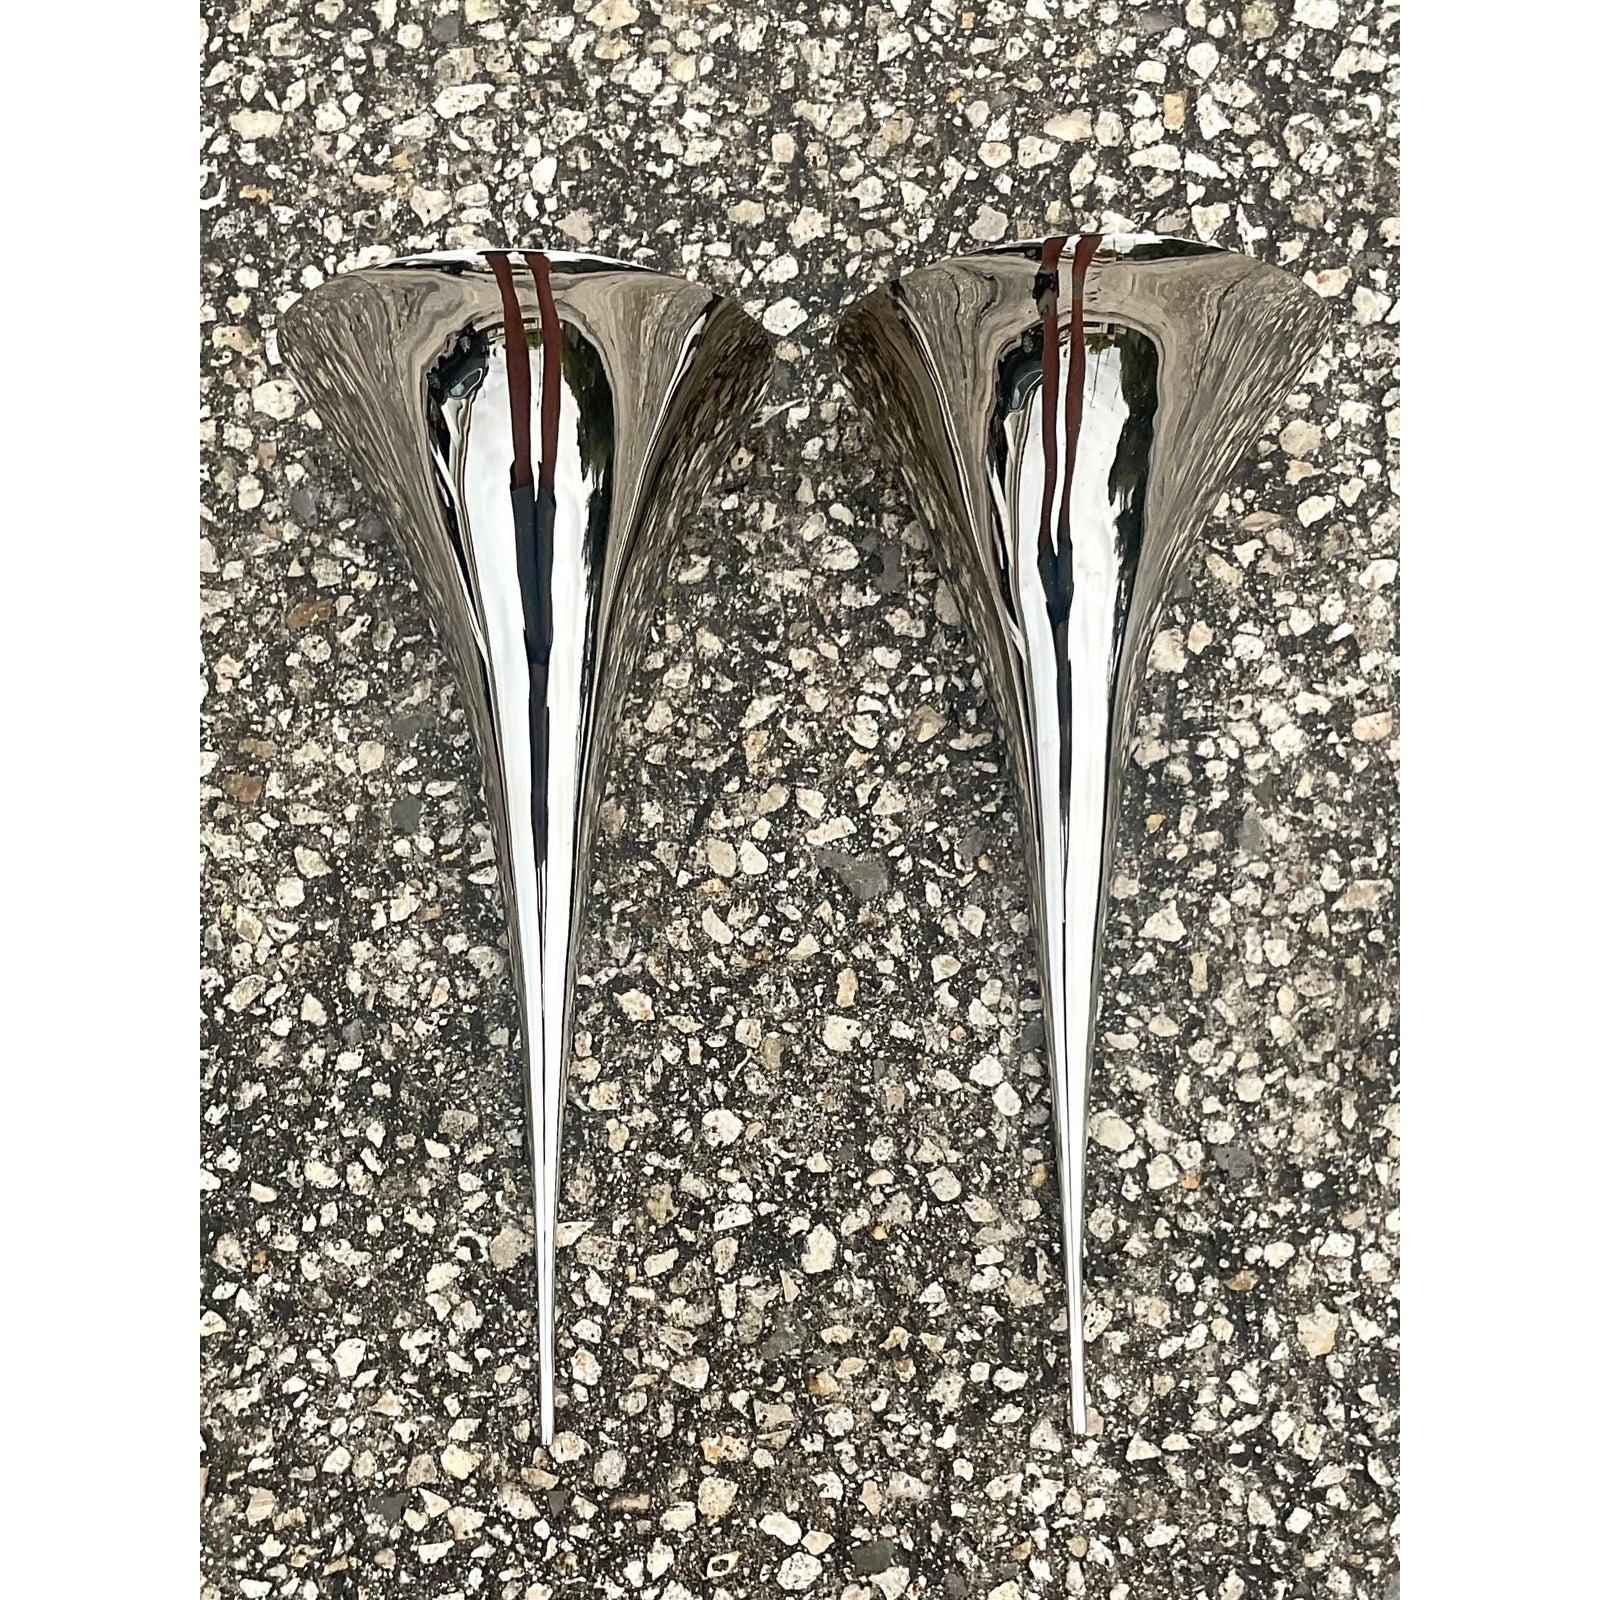 Incredible pair of vintage Visual Comfort wall sconces. Mirror polished stainless steel in a chic organic shape. The coveted Aerin Alina design. Acquired from a Palm Beach estate.